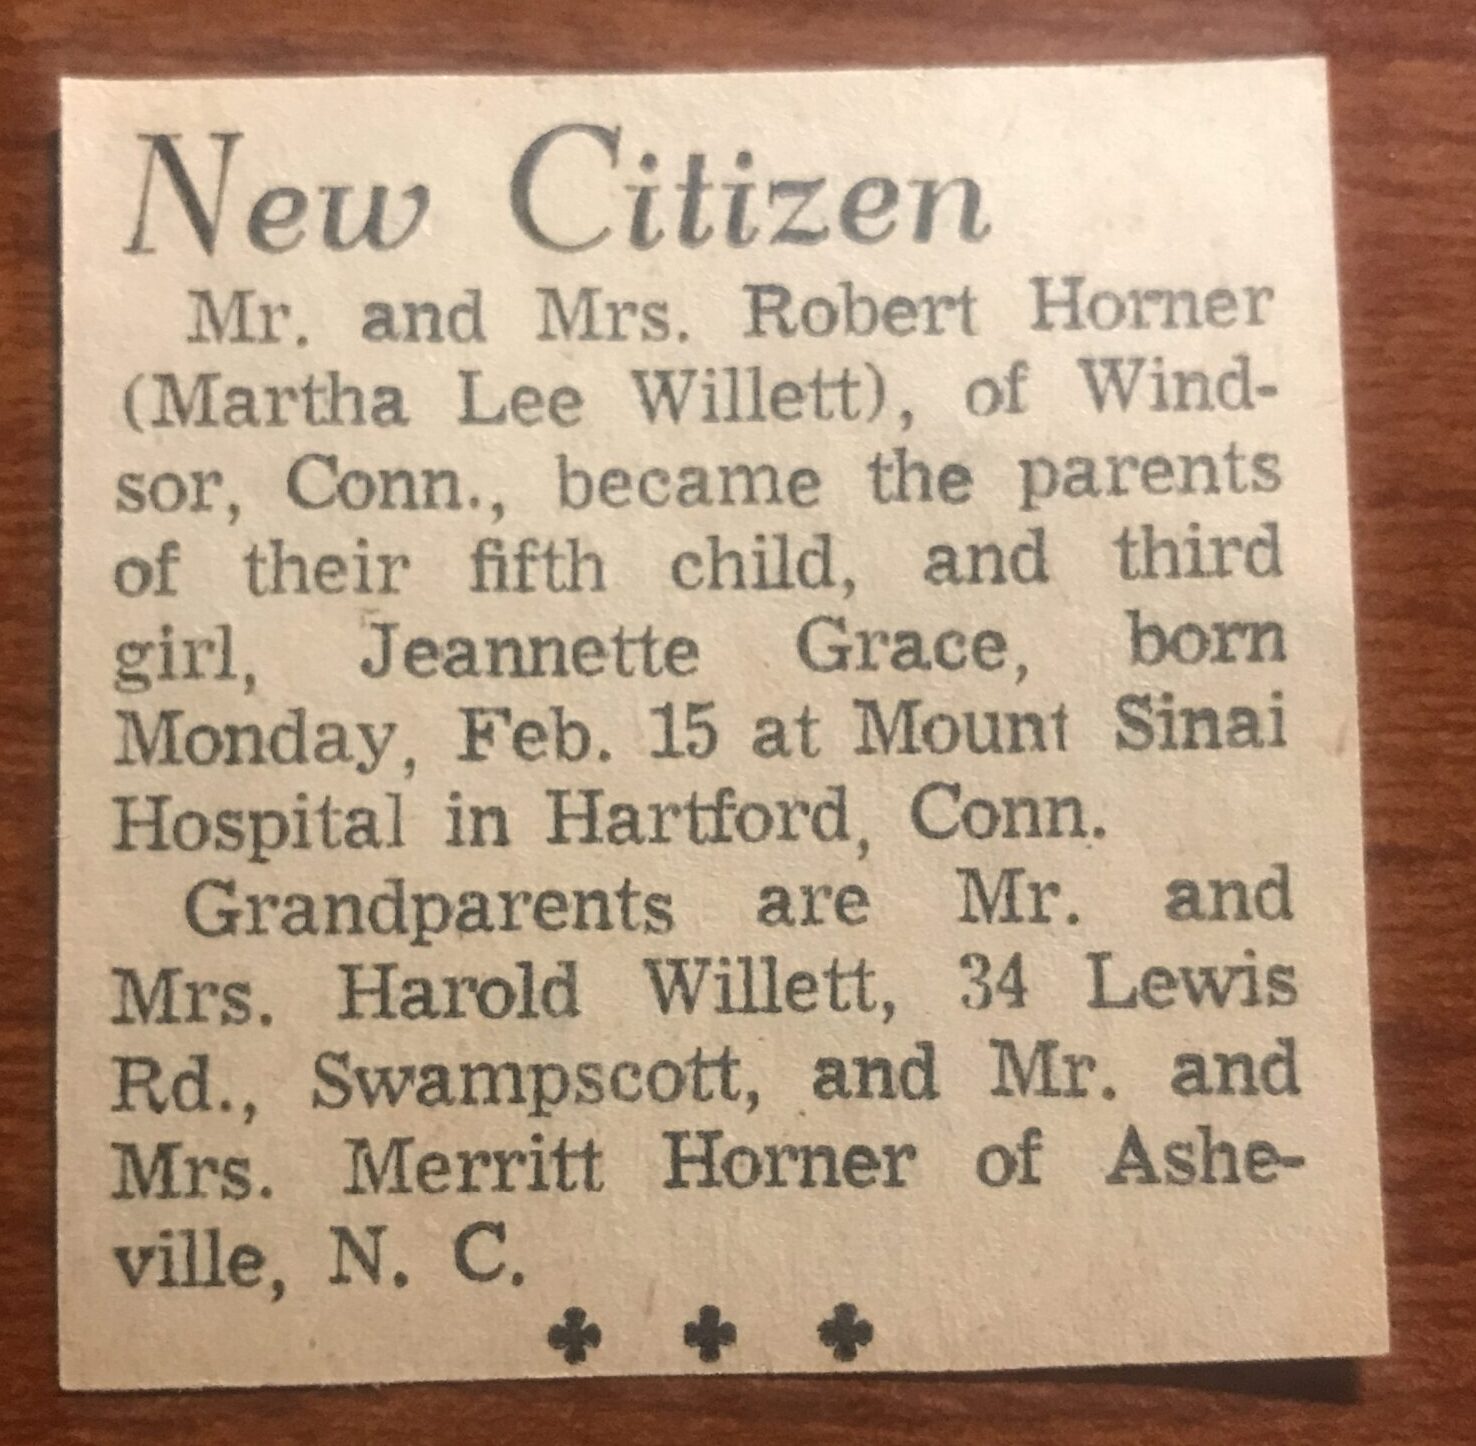 My birth announcement in a local newspaper (unknown) in Swampscott, Massachusetts, where my mother grew up.